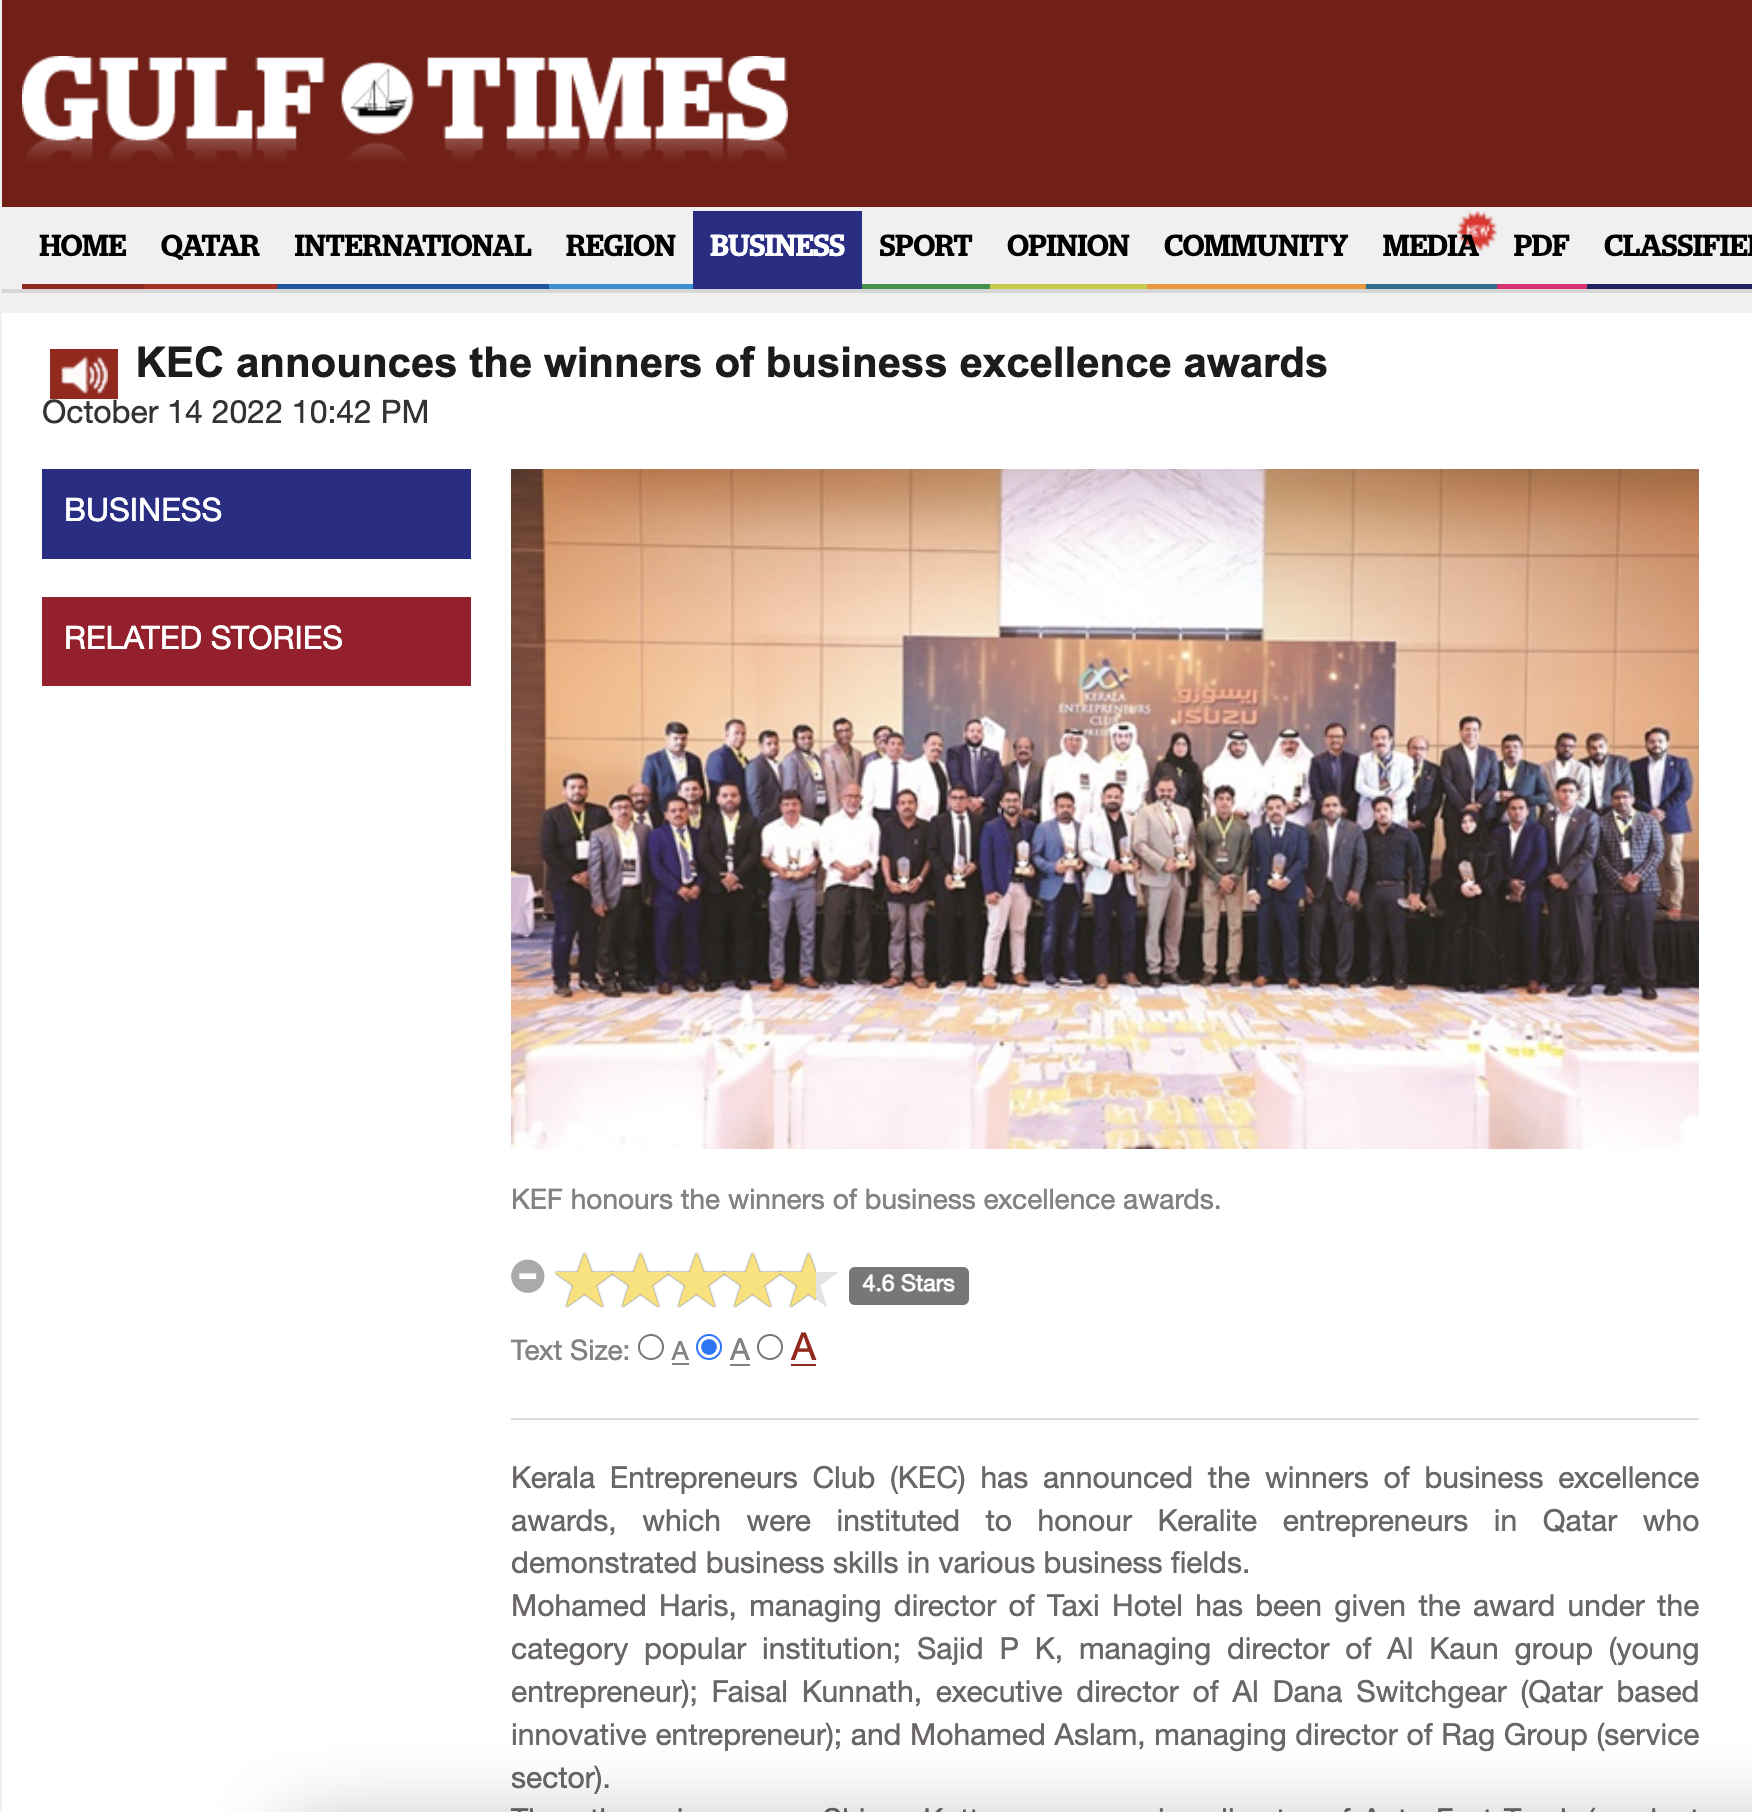 KEC announces the winners of business excellence awards